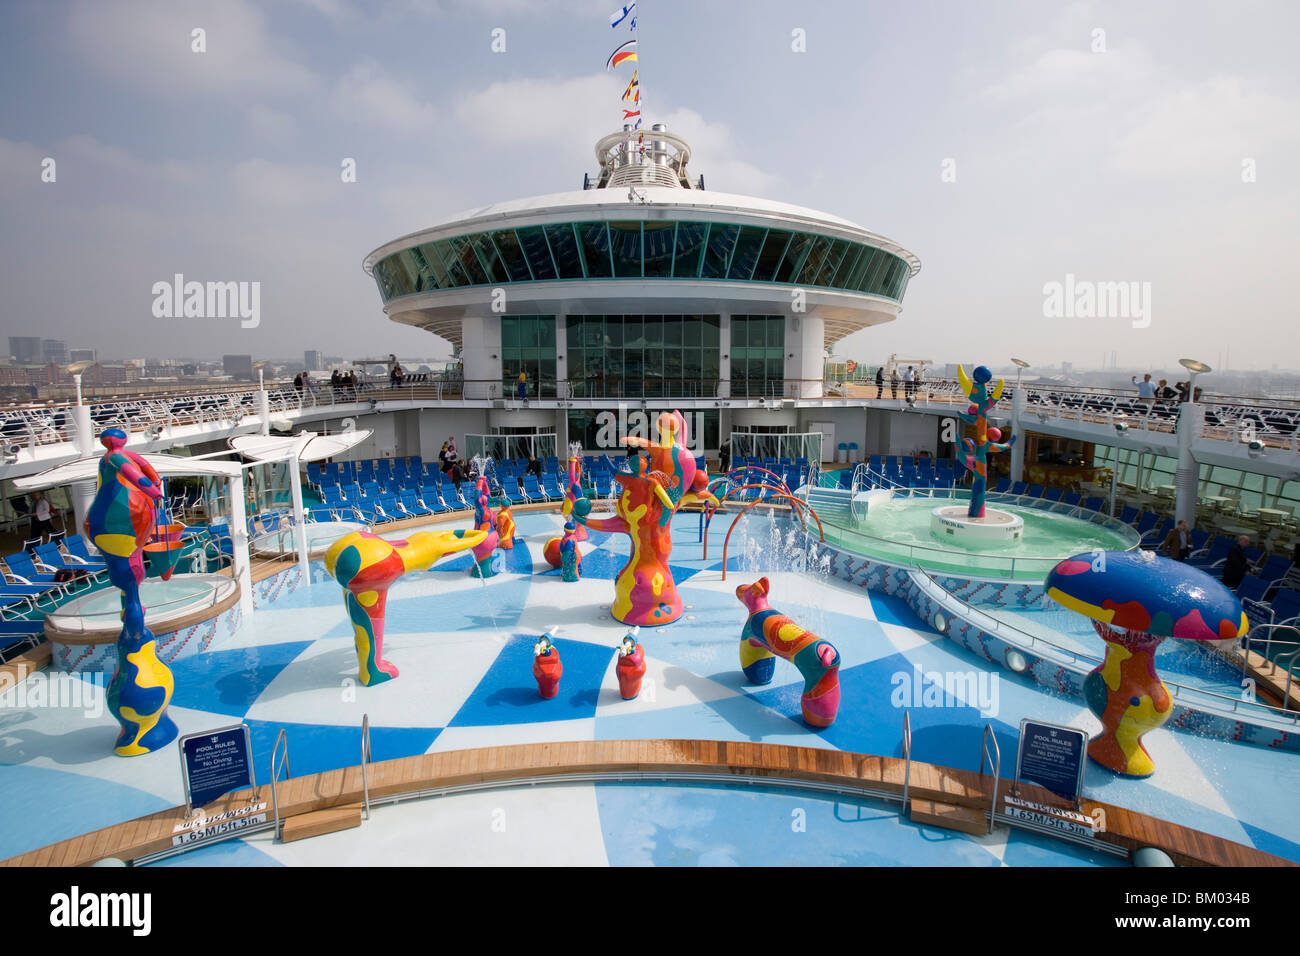 H2O Zone Pool & Fountains on Deck 11, Freedom of the Seas Cruise Ship, Royal Caribbean International Cruise Line Stock Photo